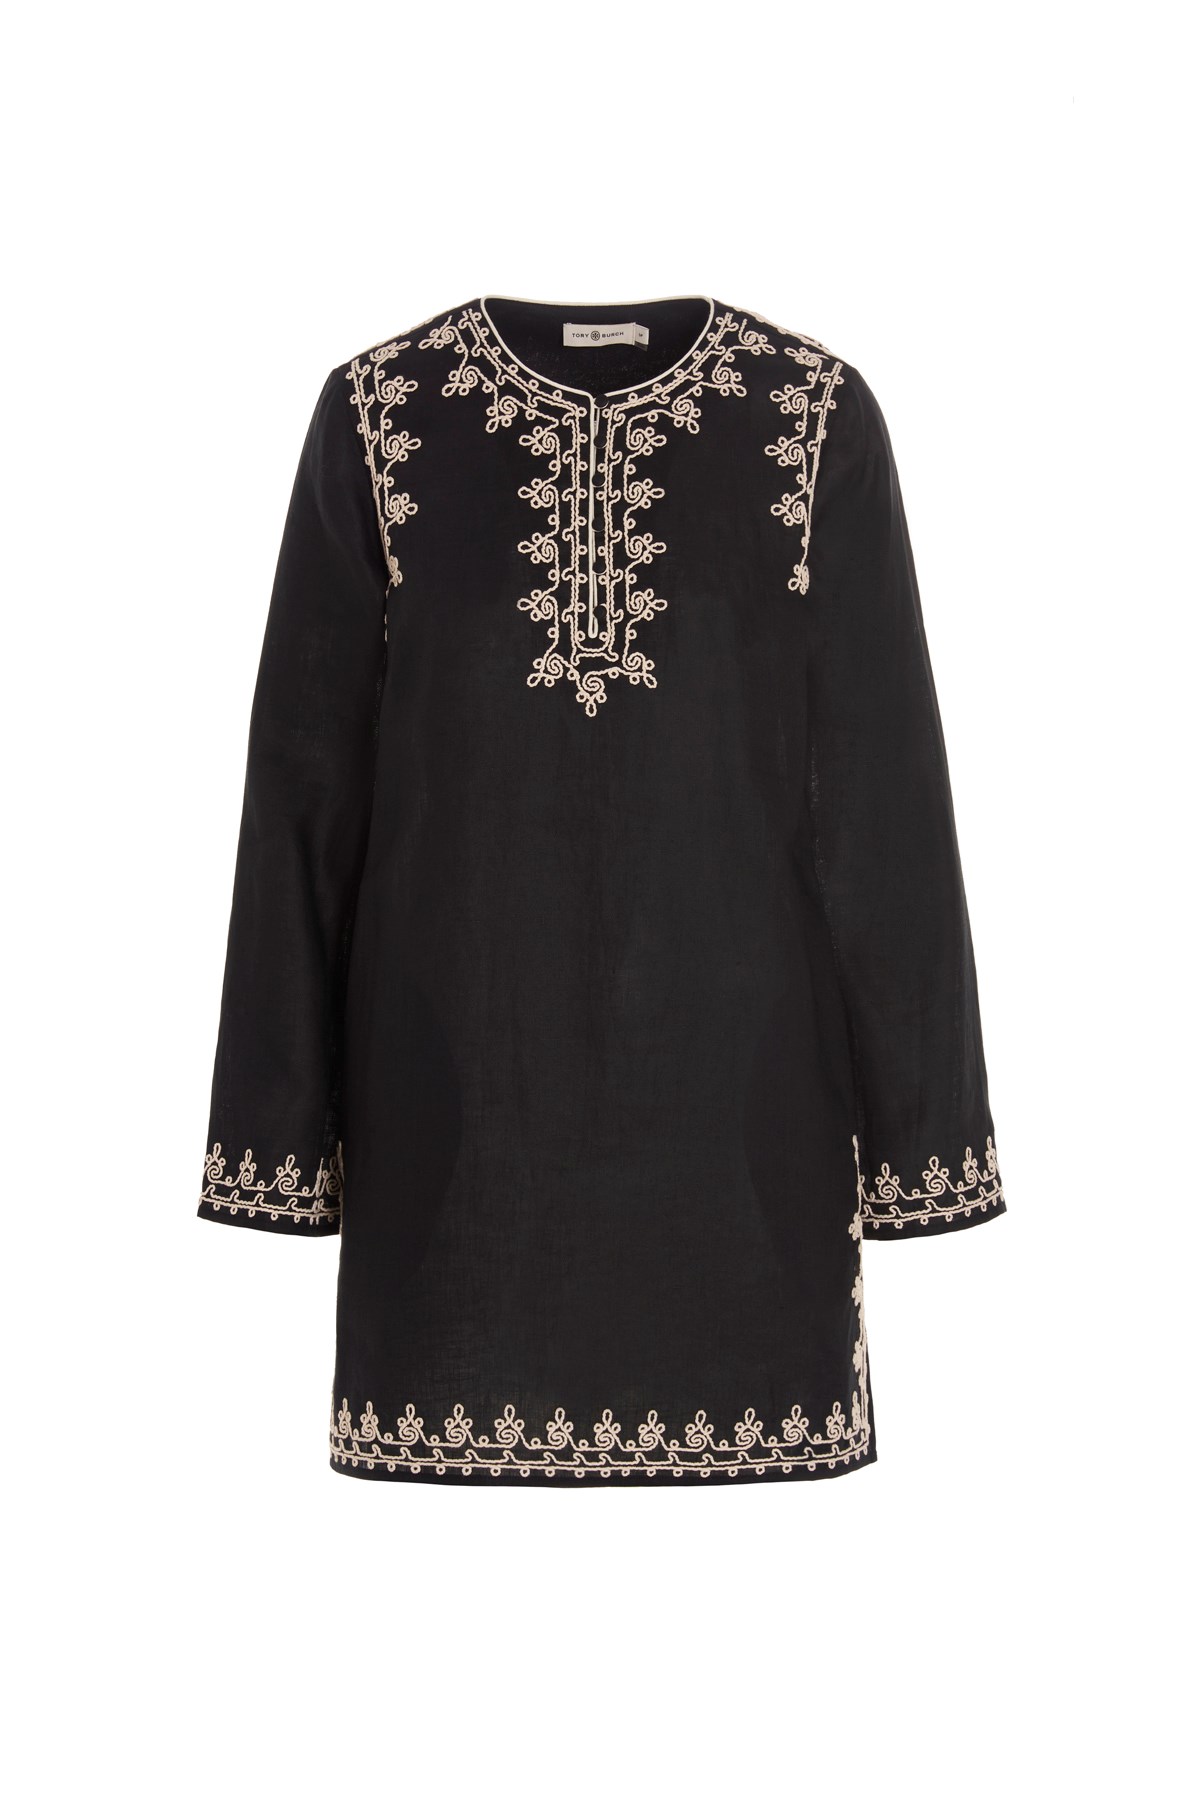 TORY BURCH Contrast Embroidery Caftan